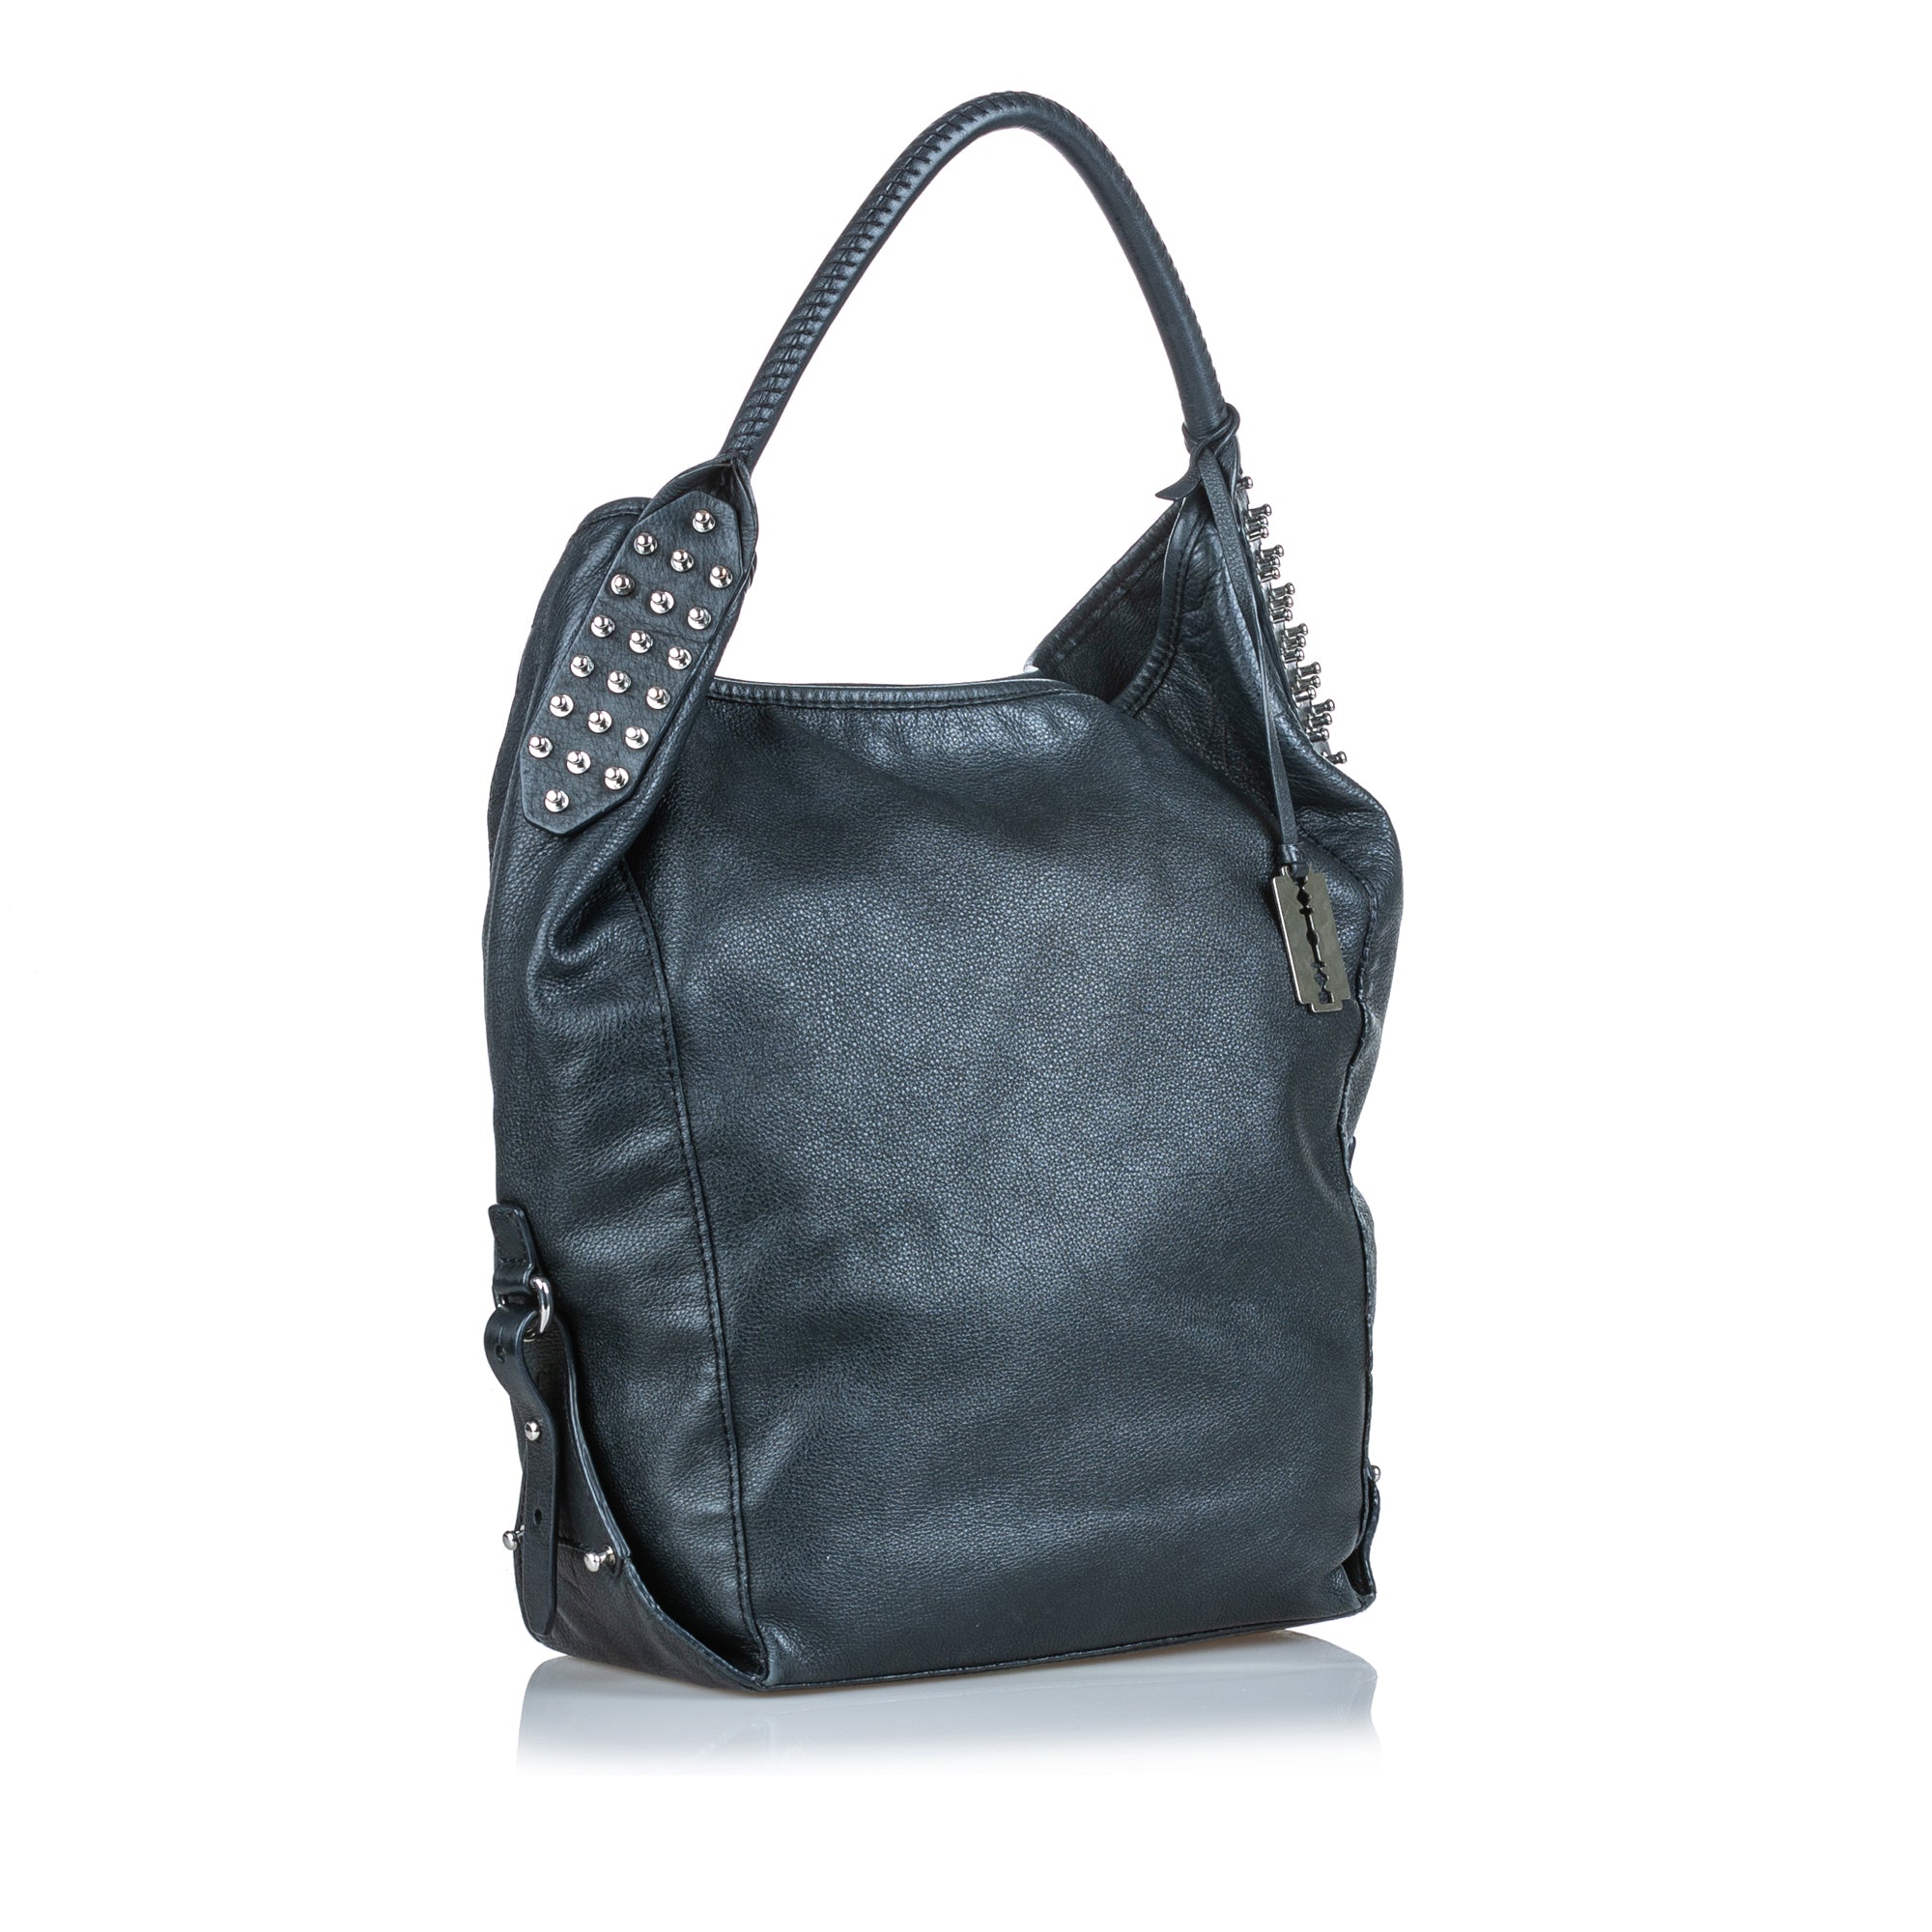 Buy & Consign Authentic Alexander Mcqueen Studded Leather Hobo Bag Grey at The Plush Posh